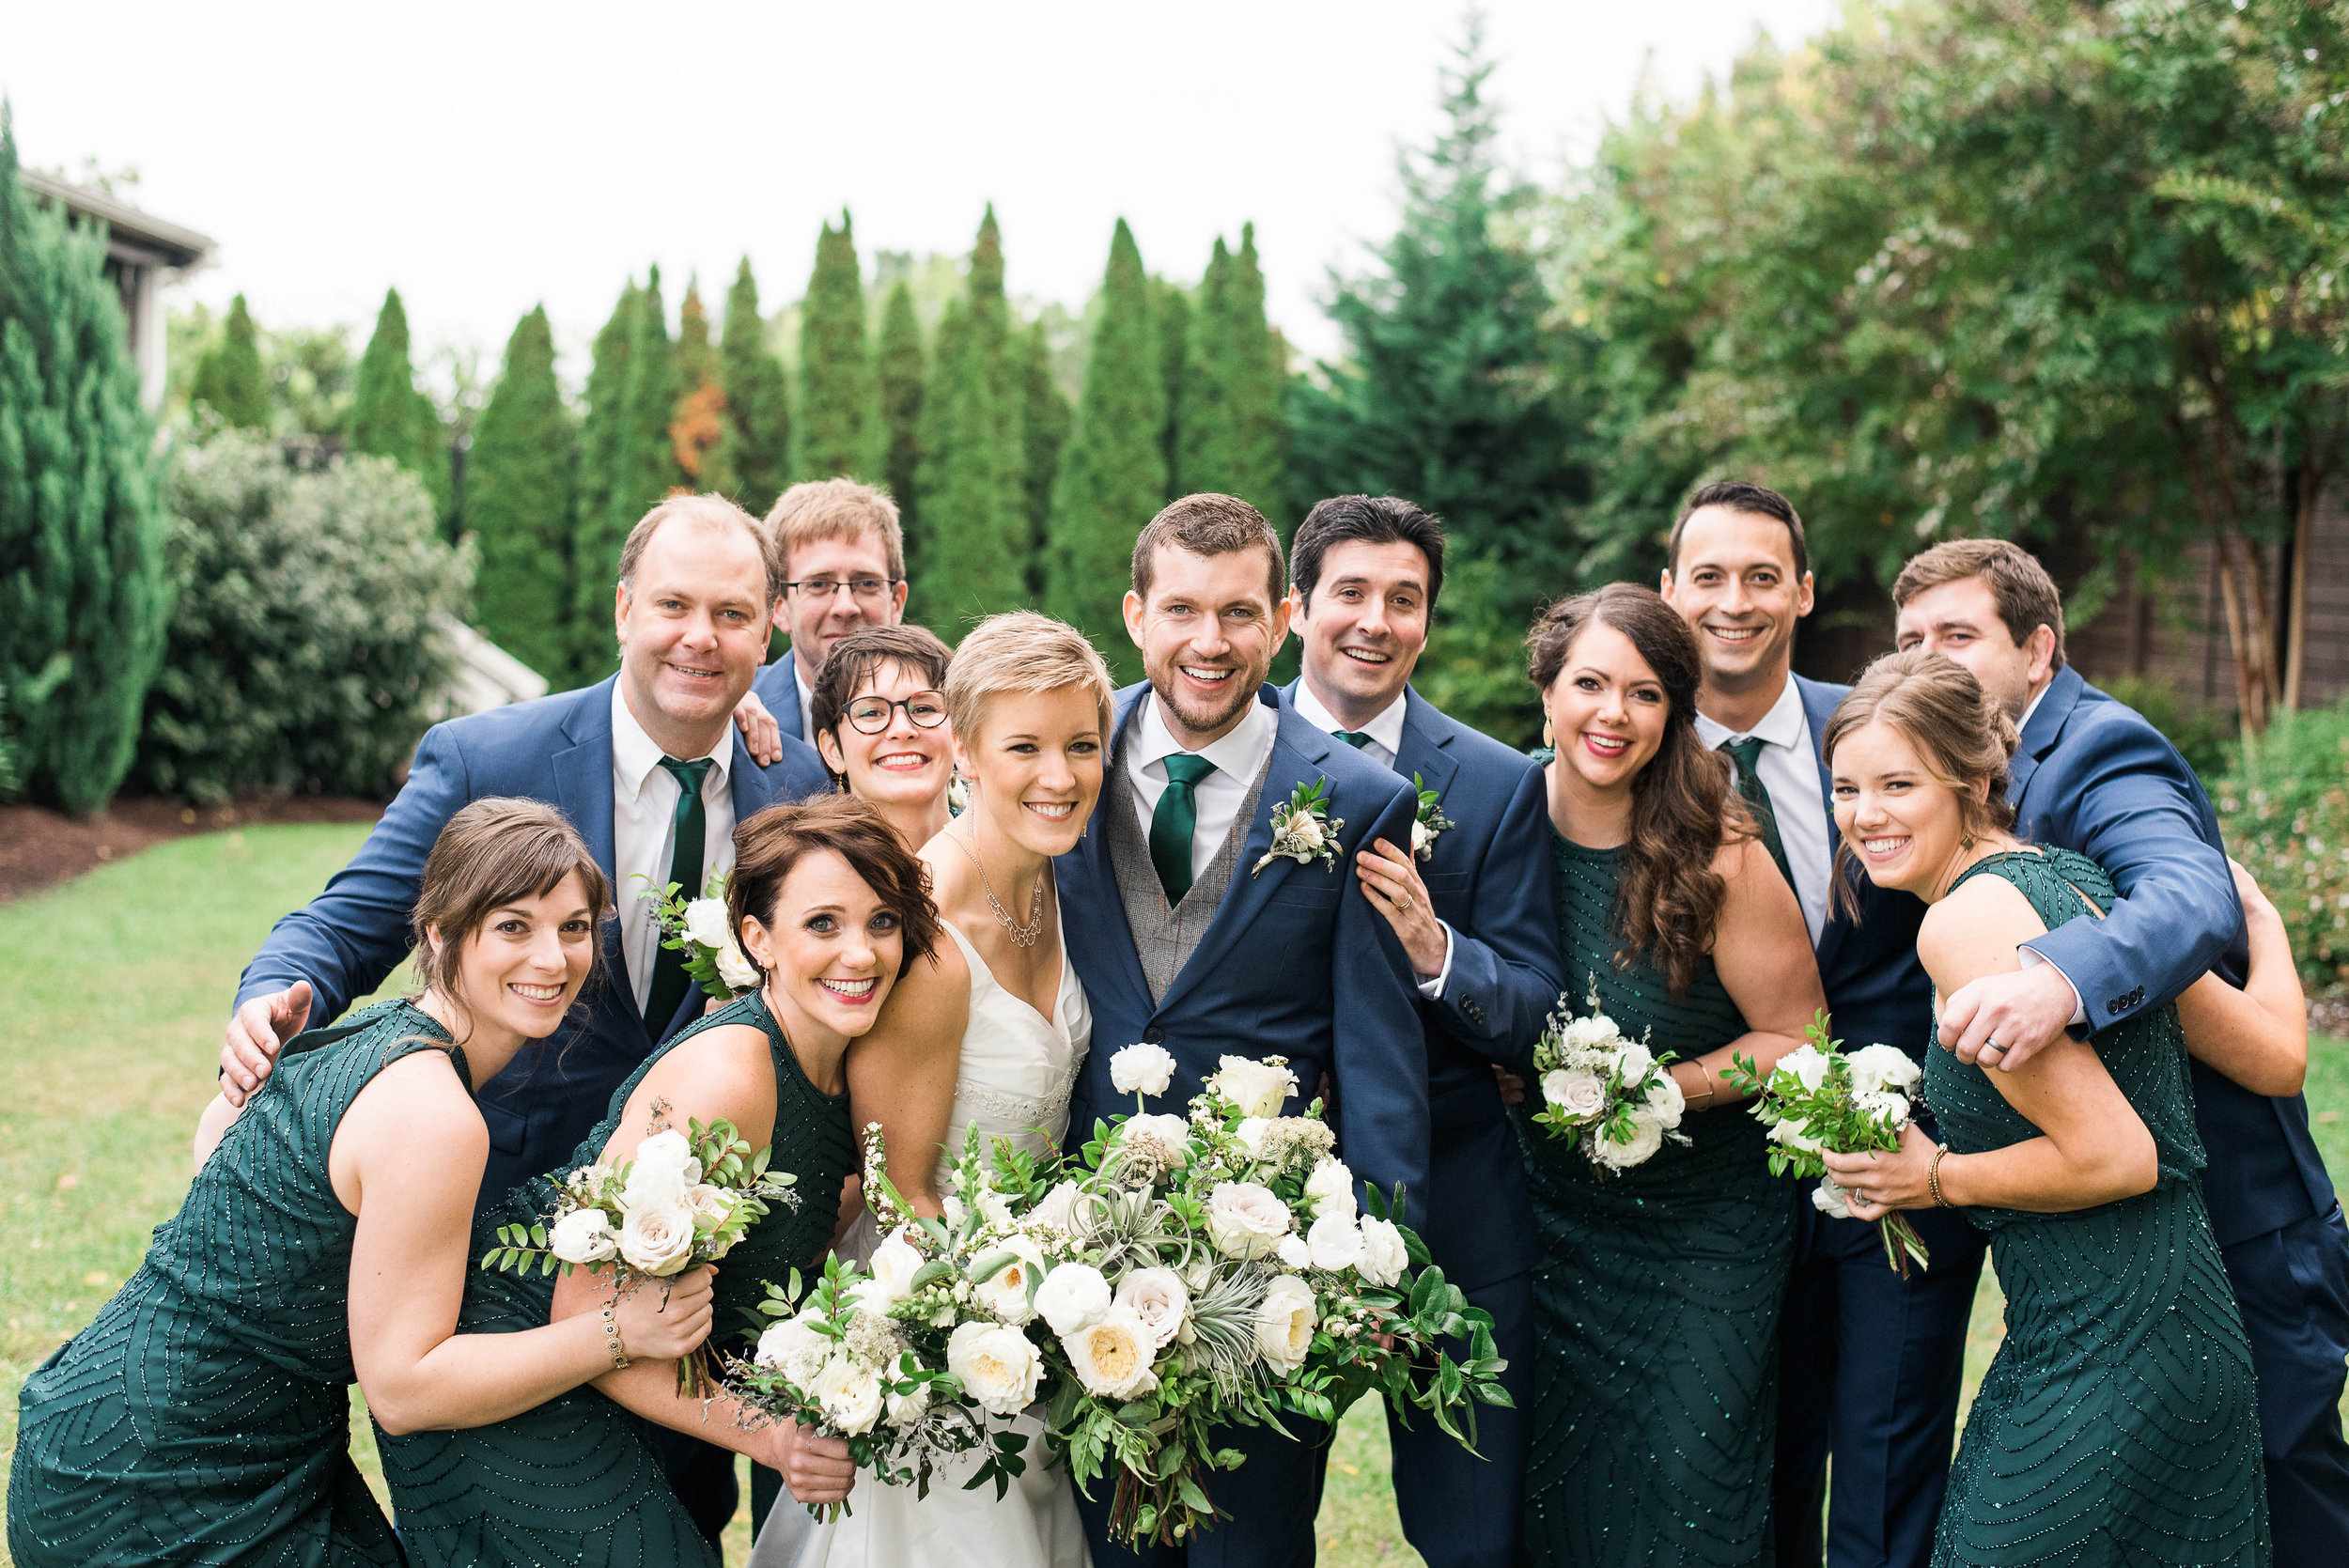 Emerald bridesmaid dresses with white and neutral bouquets // Nashville Wedding Flowers